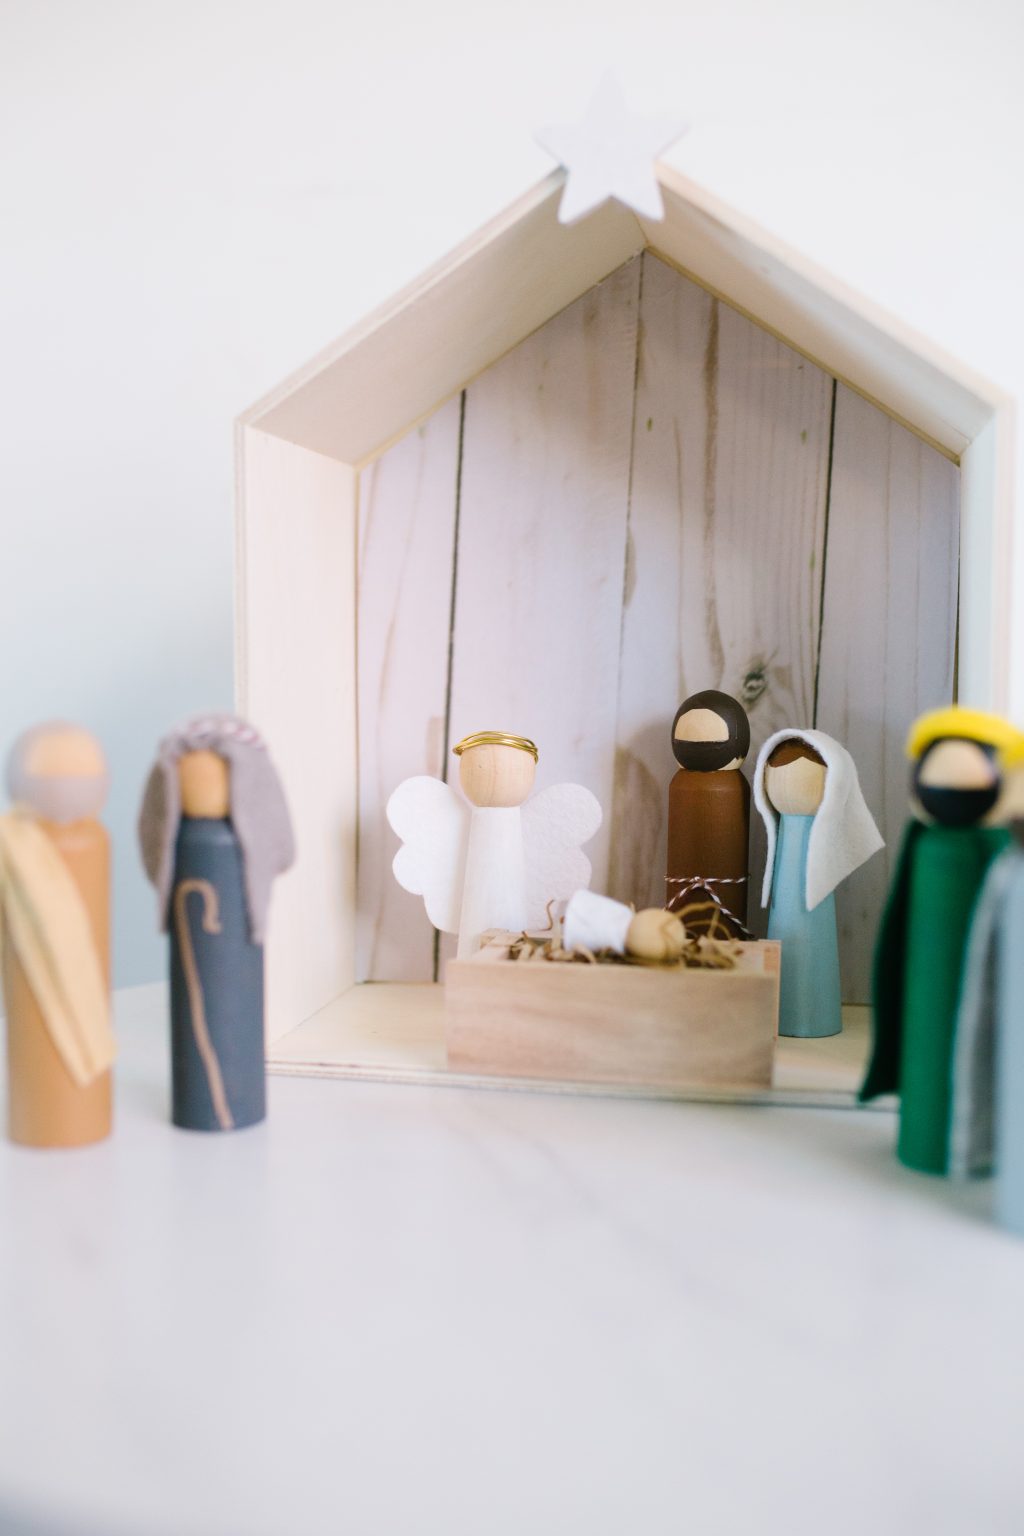 How To Make Your Own Diy Wooden Peg Doll Nativity Set The Pretty Life Girls